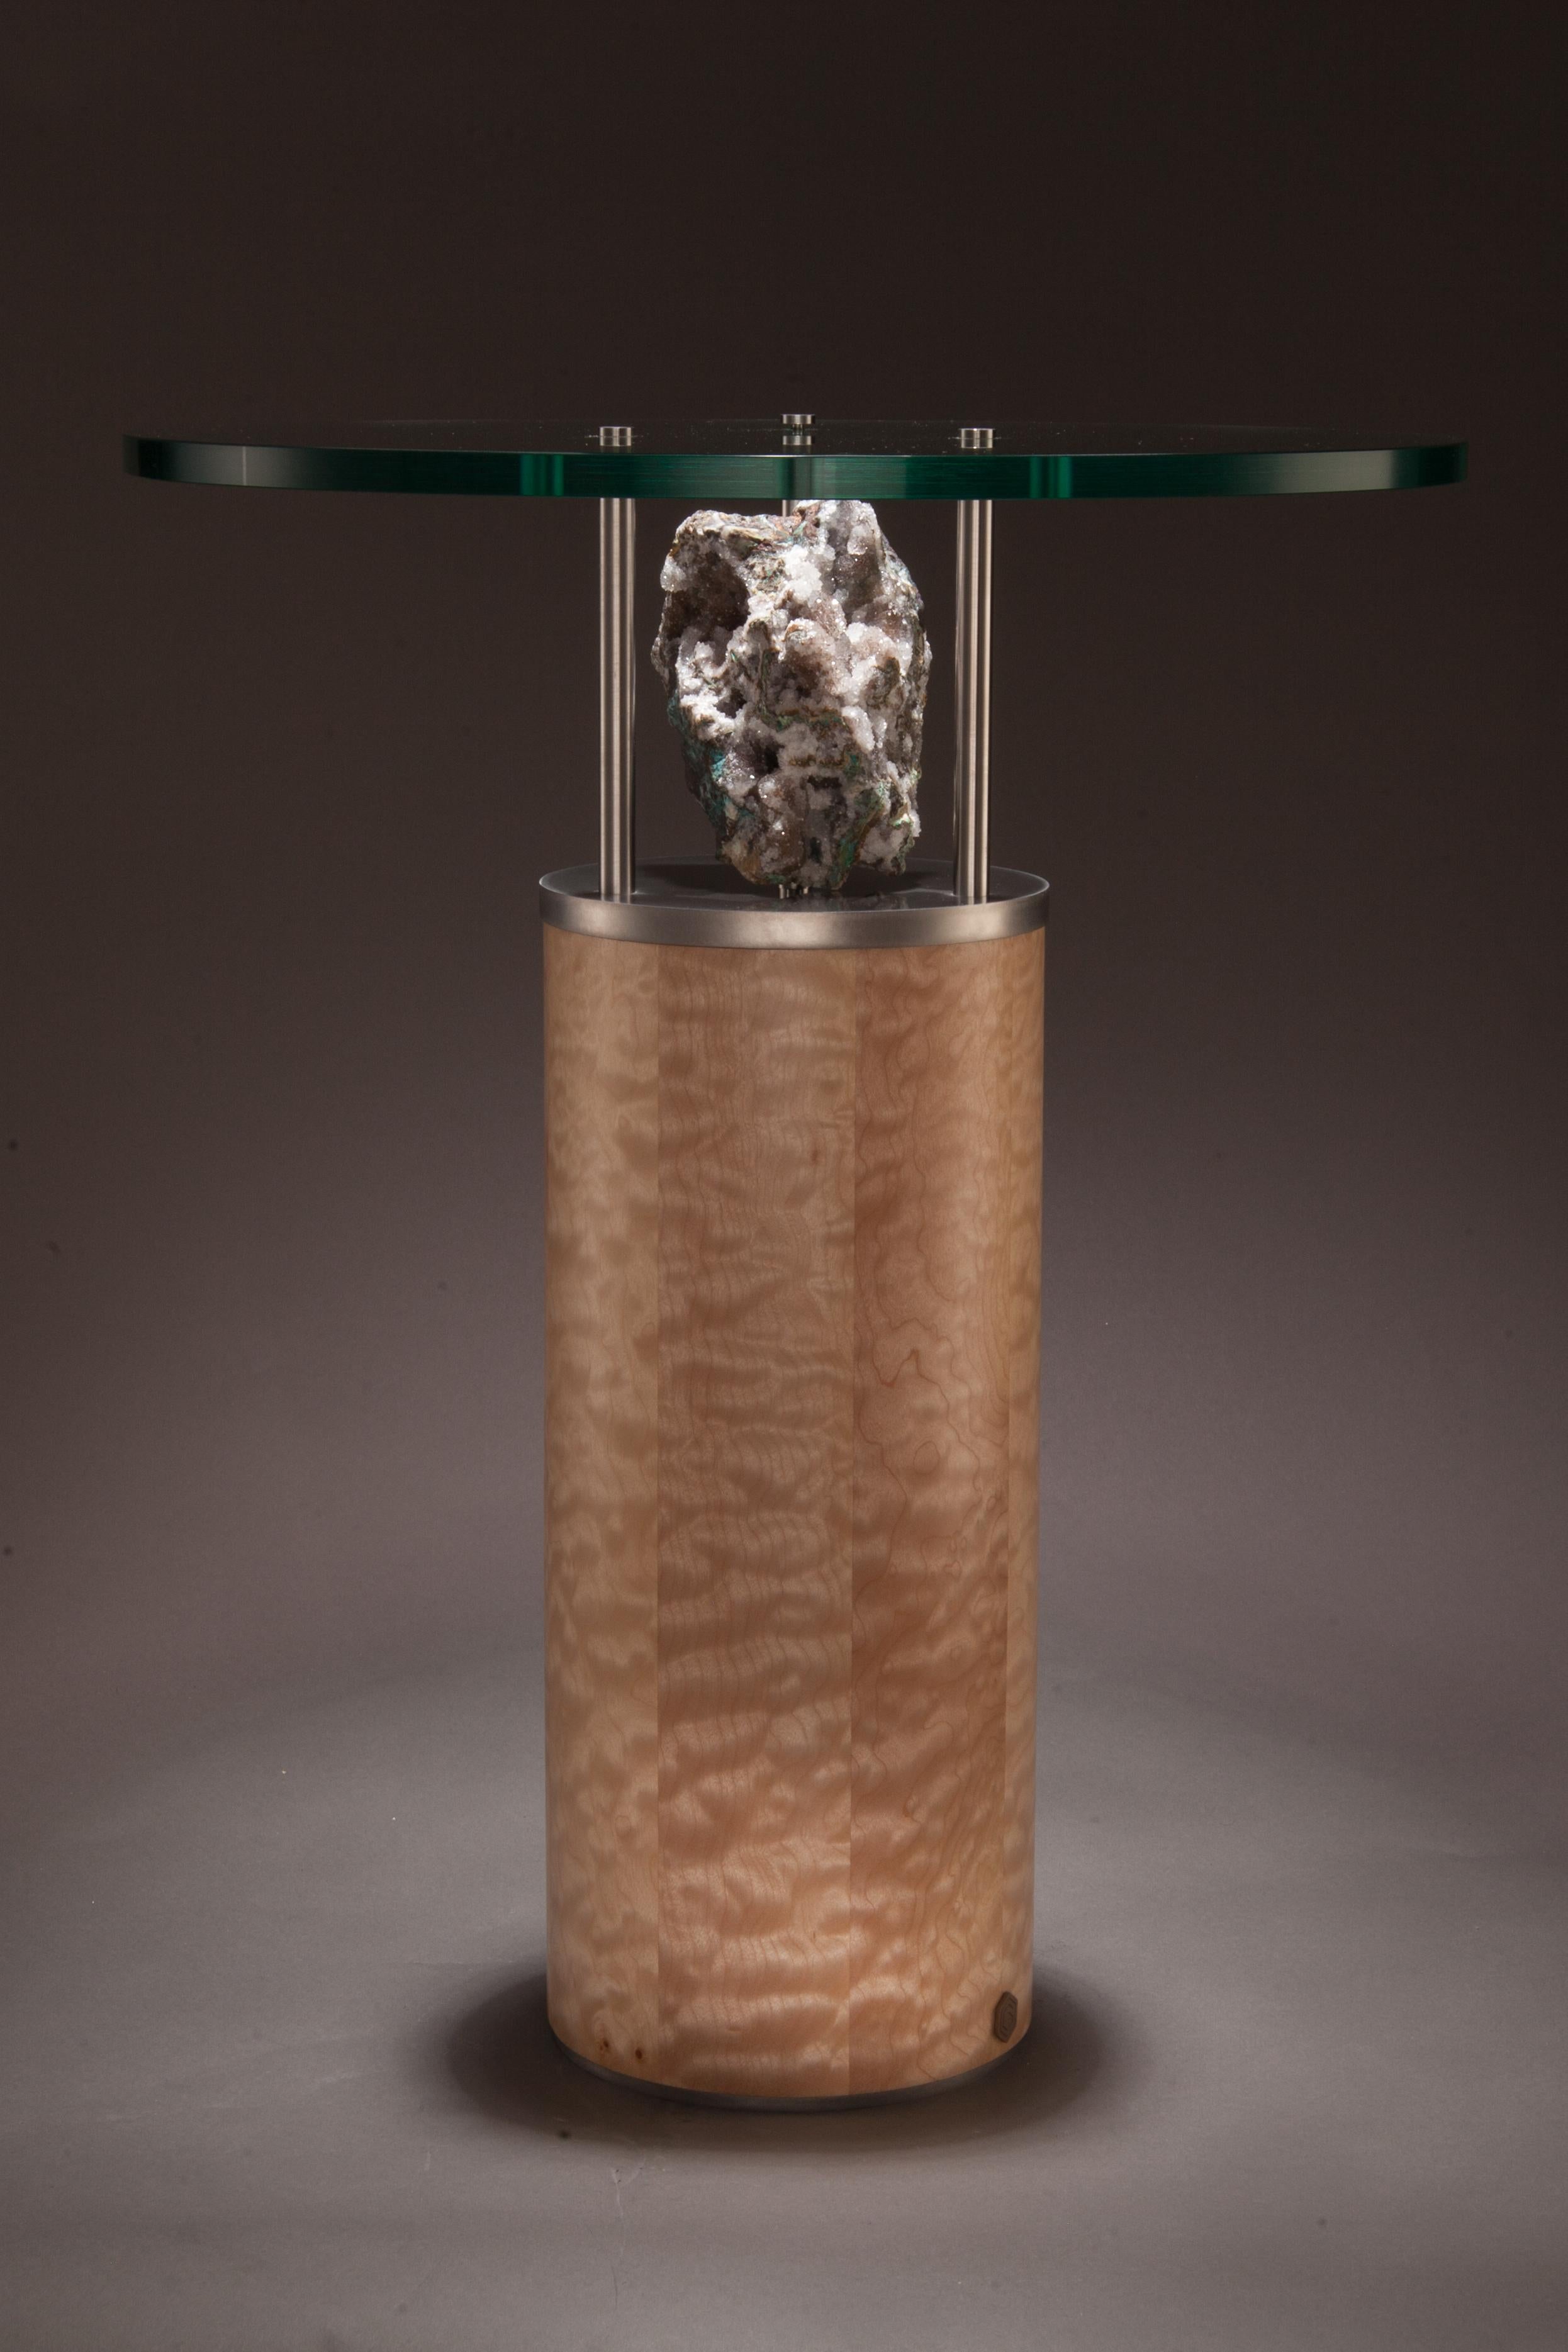 Maple end table with quartz under a glass top with satin finish stainless steel mounts and trim.